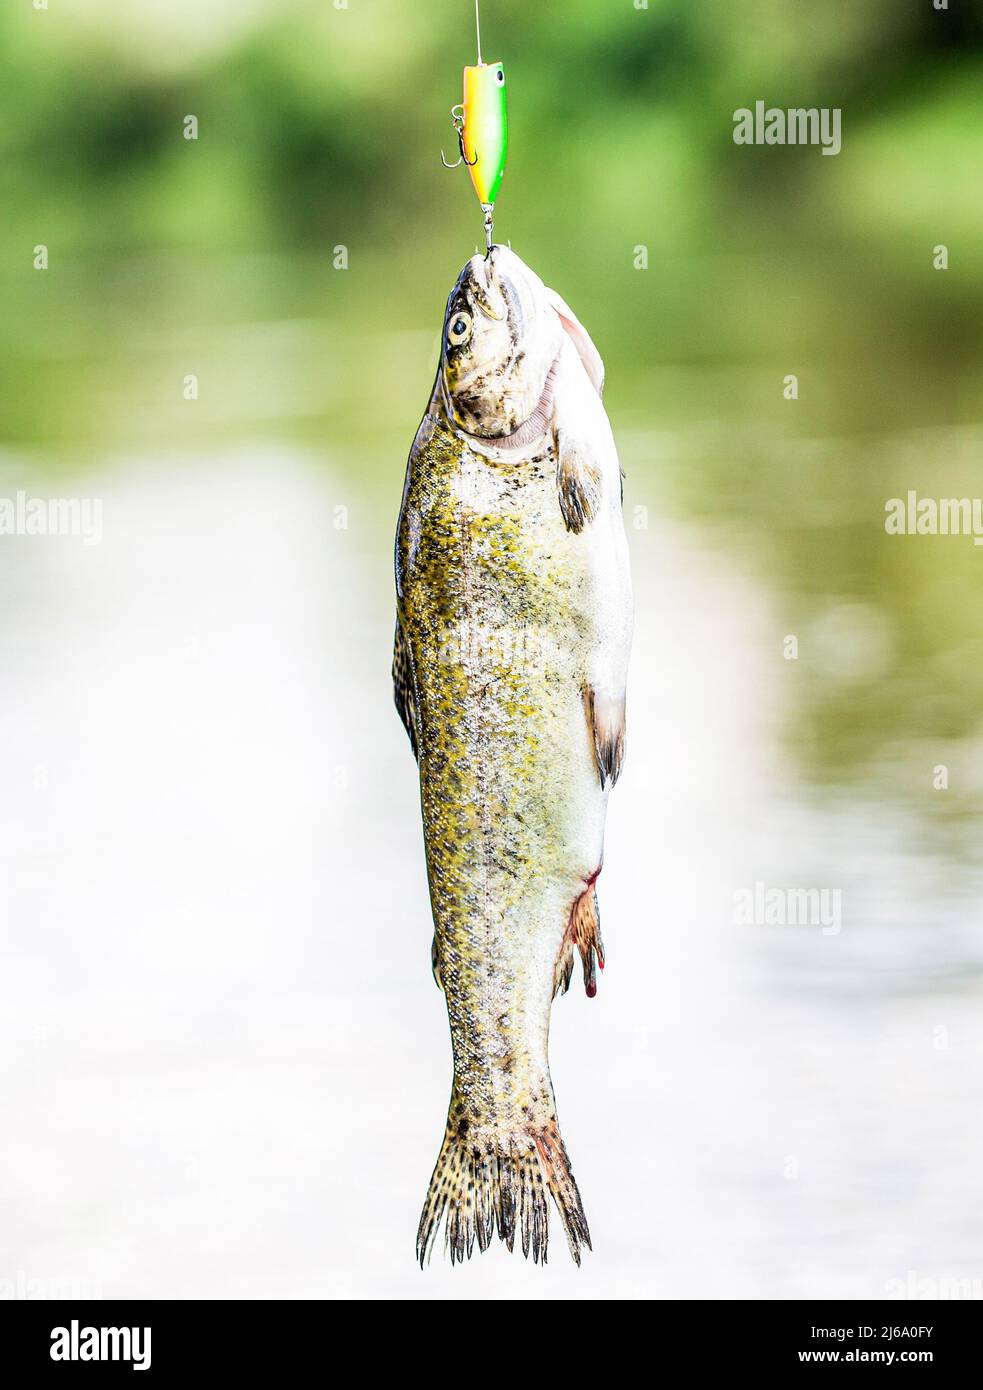 Fishing Creel with Brook Trout Stock Image - Image of lure